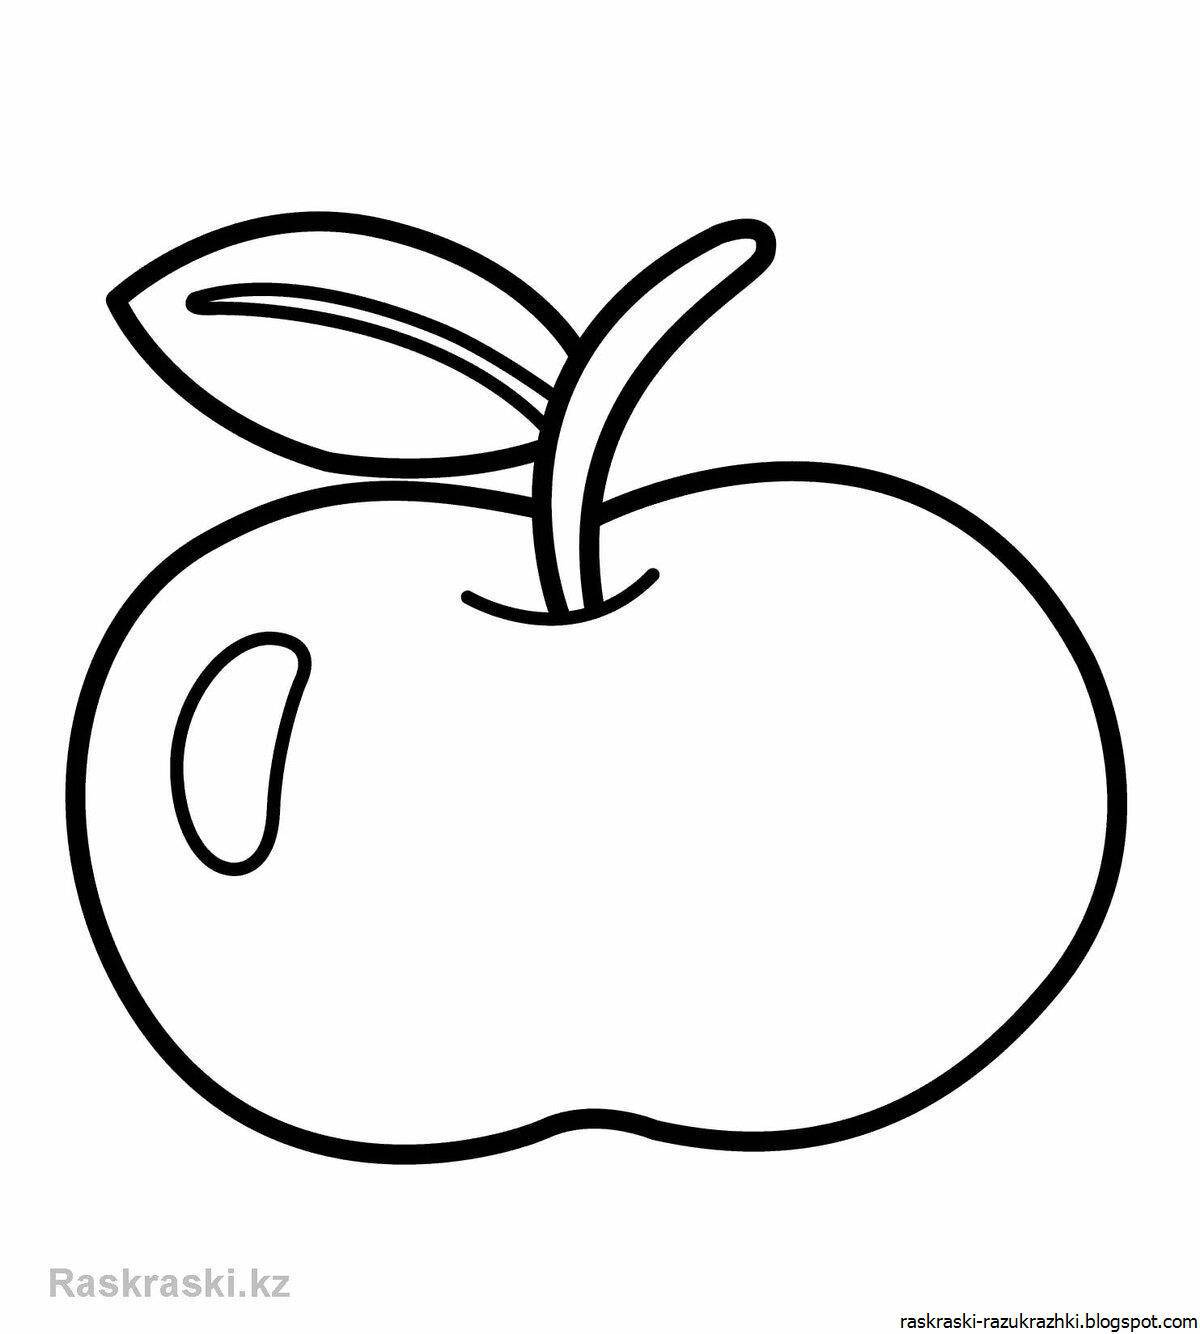 Fabulous fruits and vegetables coloring pages for kids